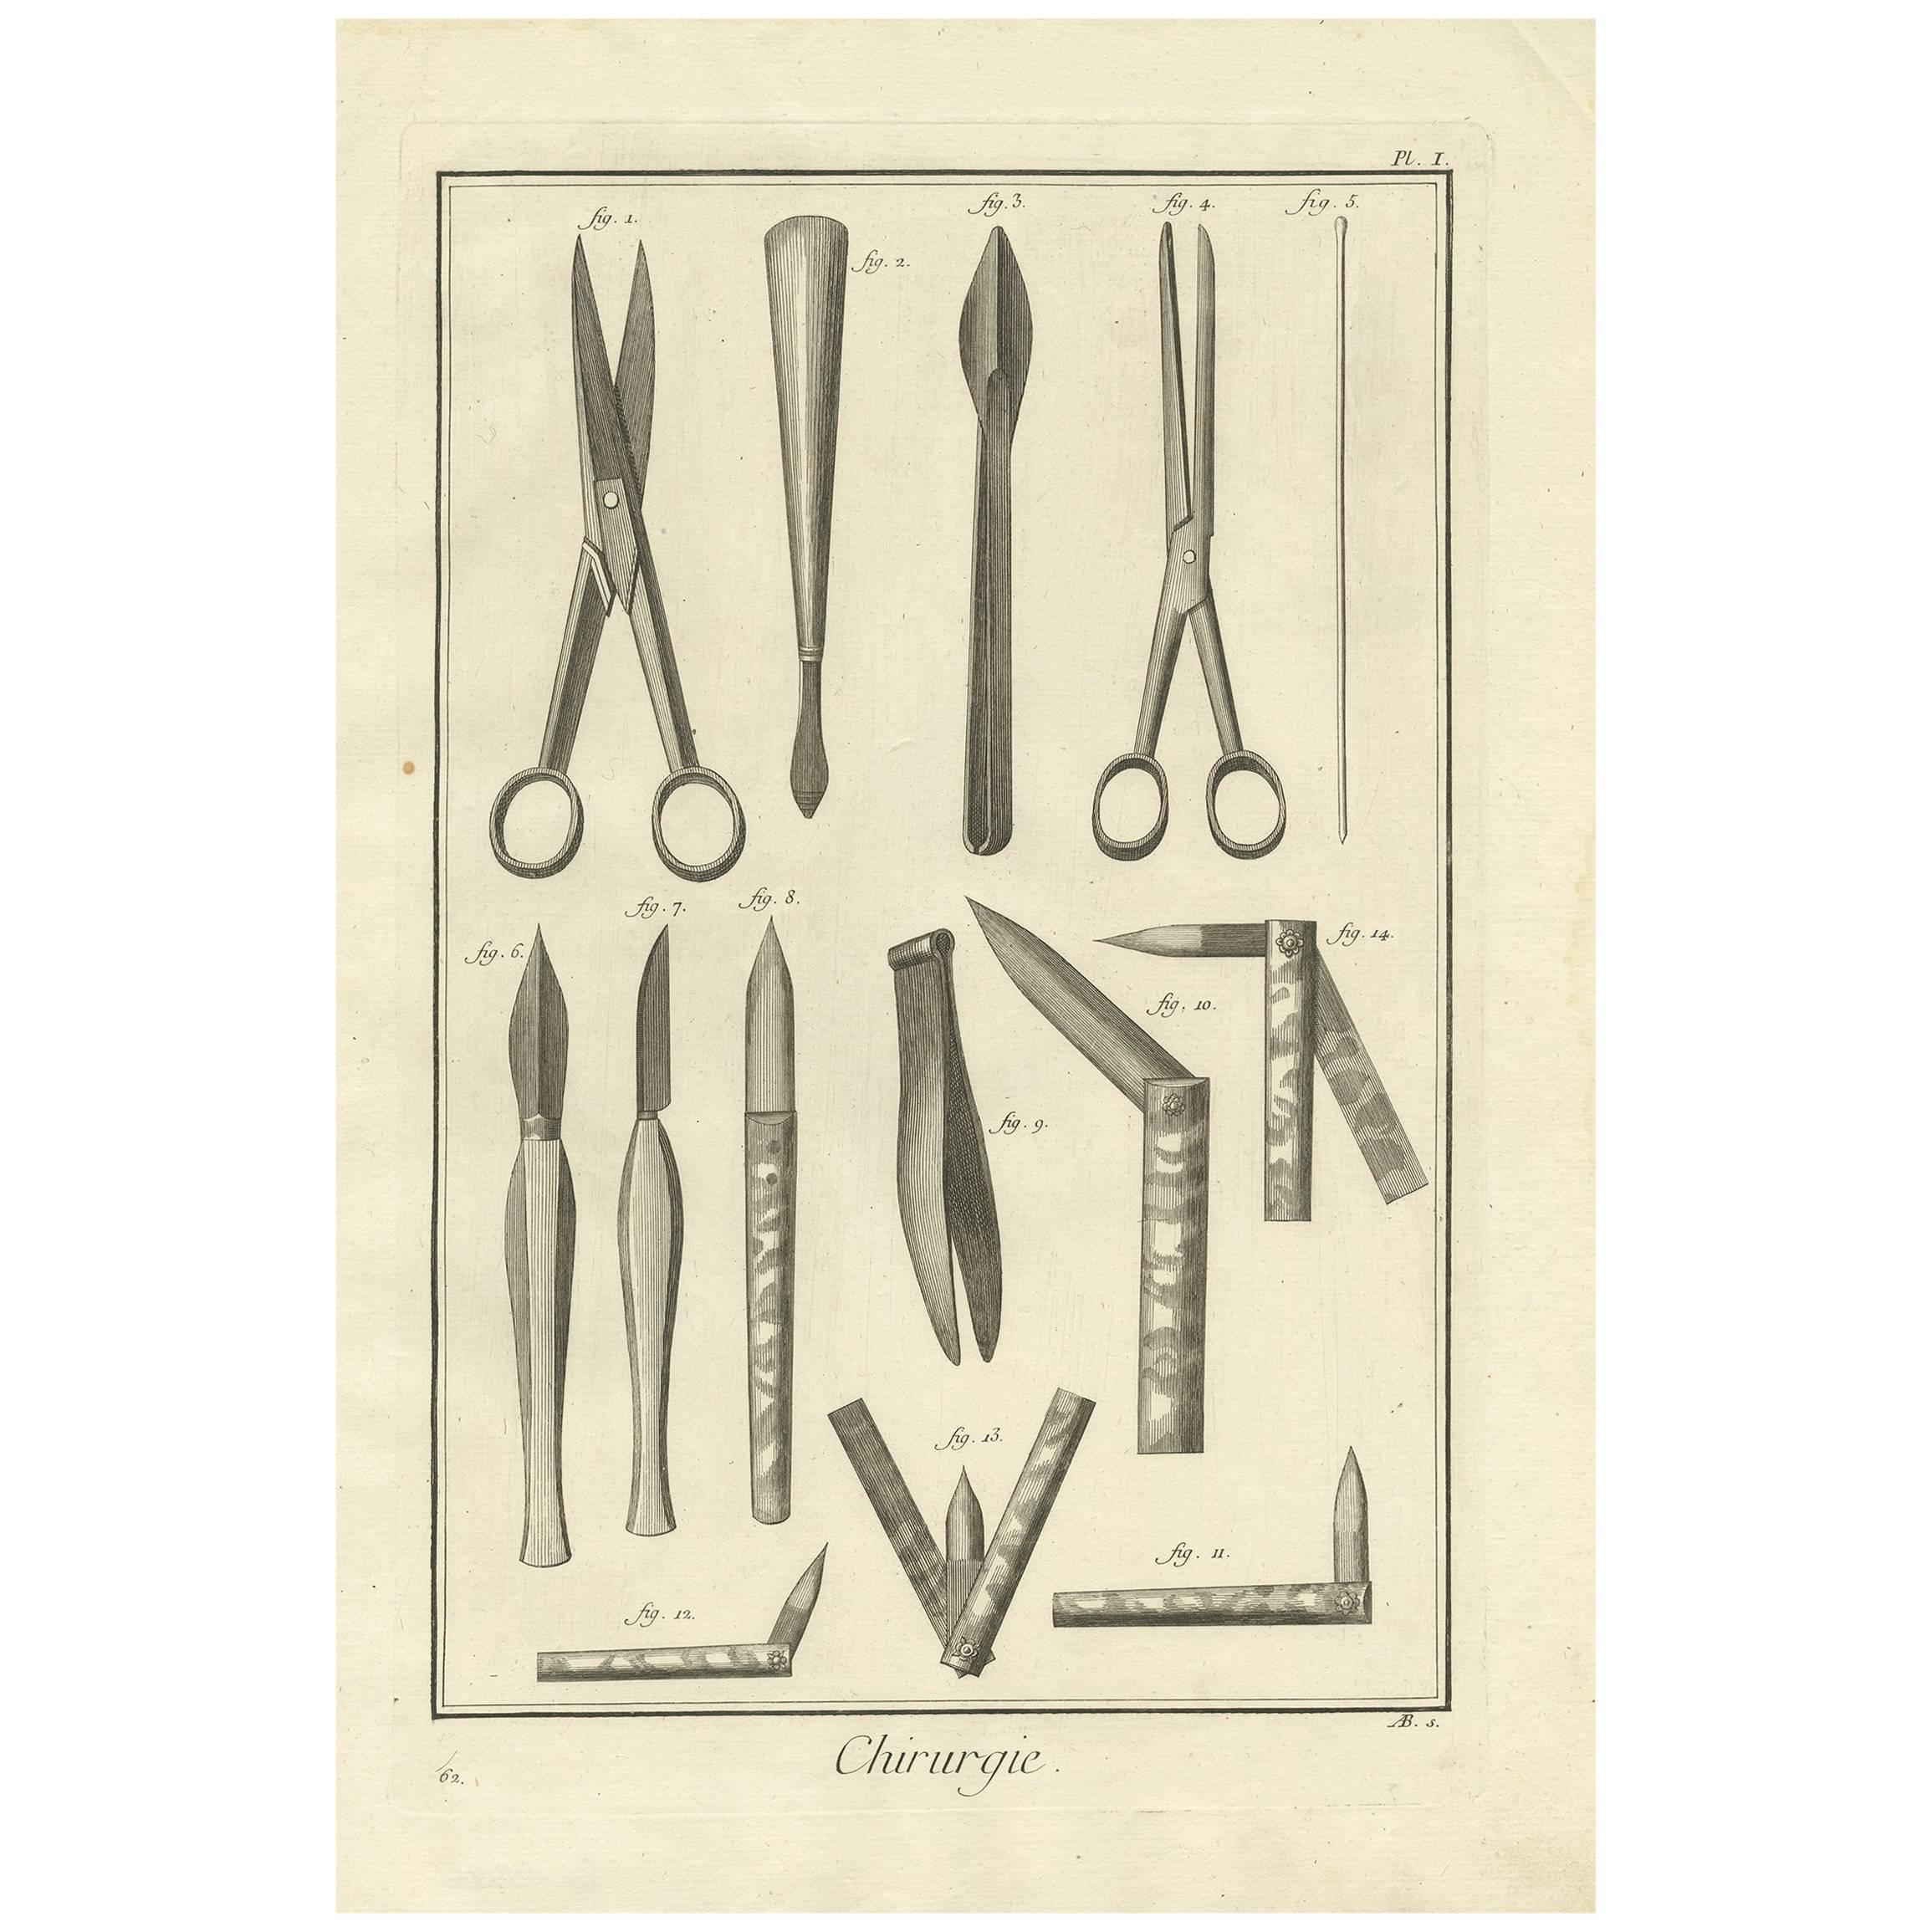 Antique Medical Print with Surgical Instruments by D. Diderot, circa 1760